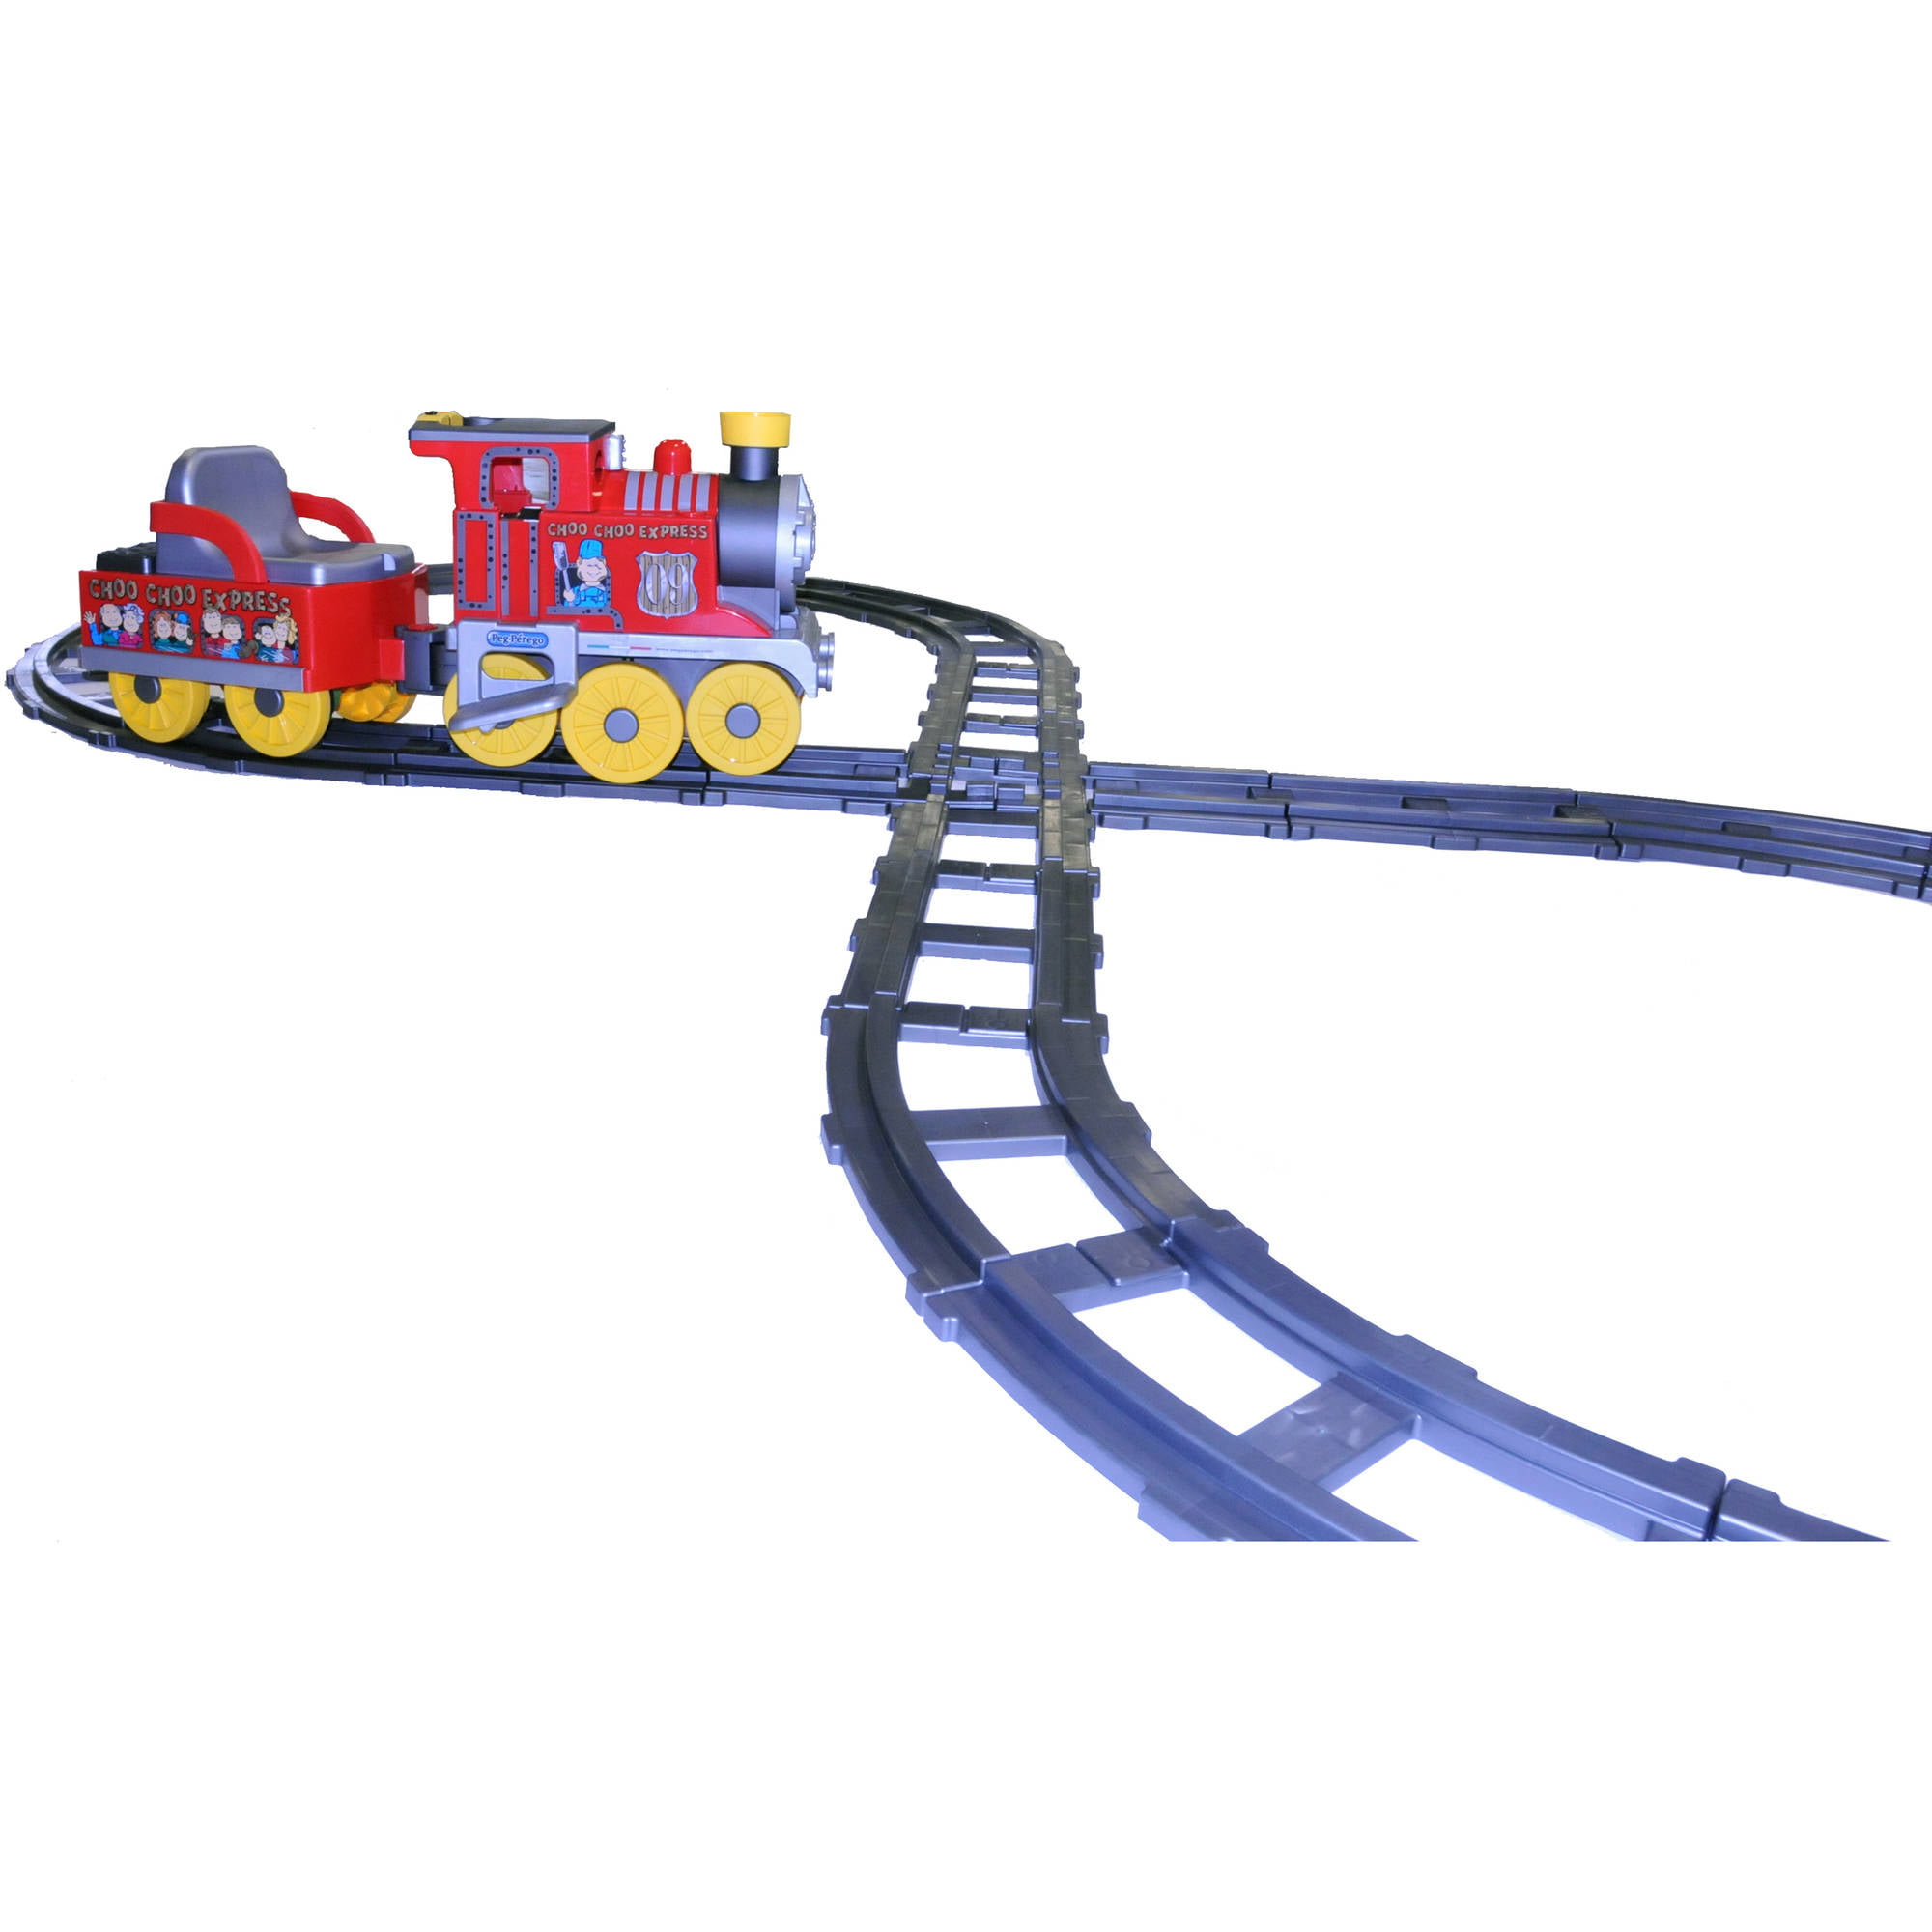 Peg Perego Curved Track Piece Thomas The Train Ride On 